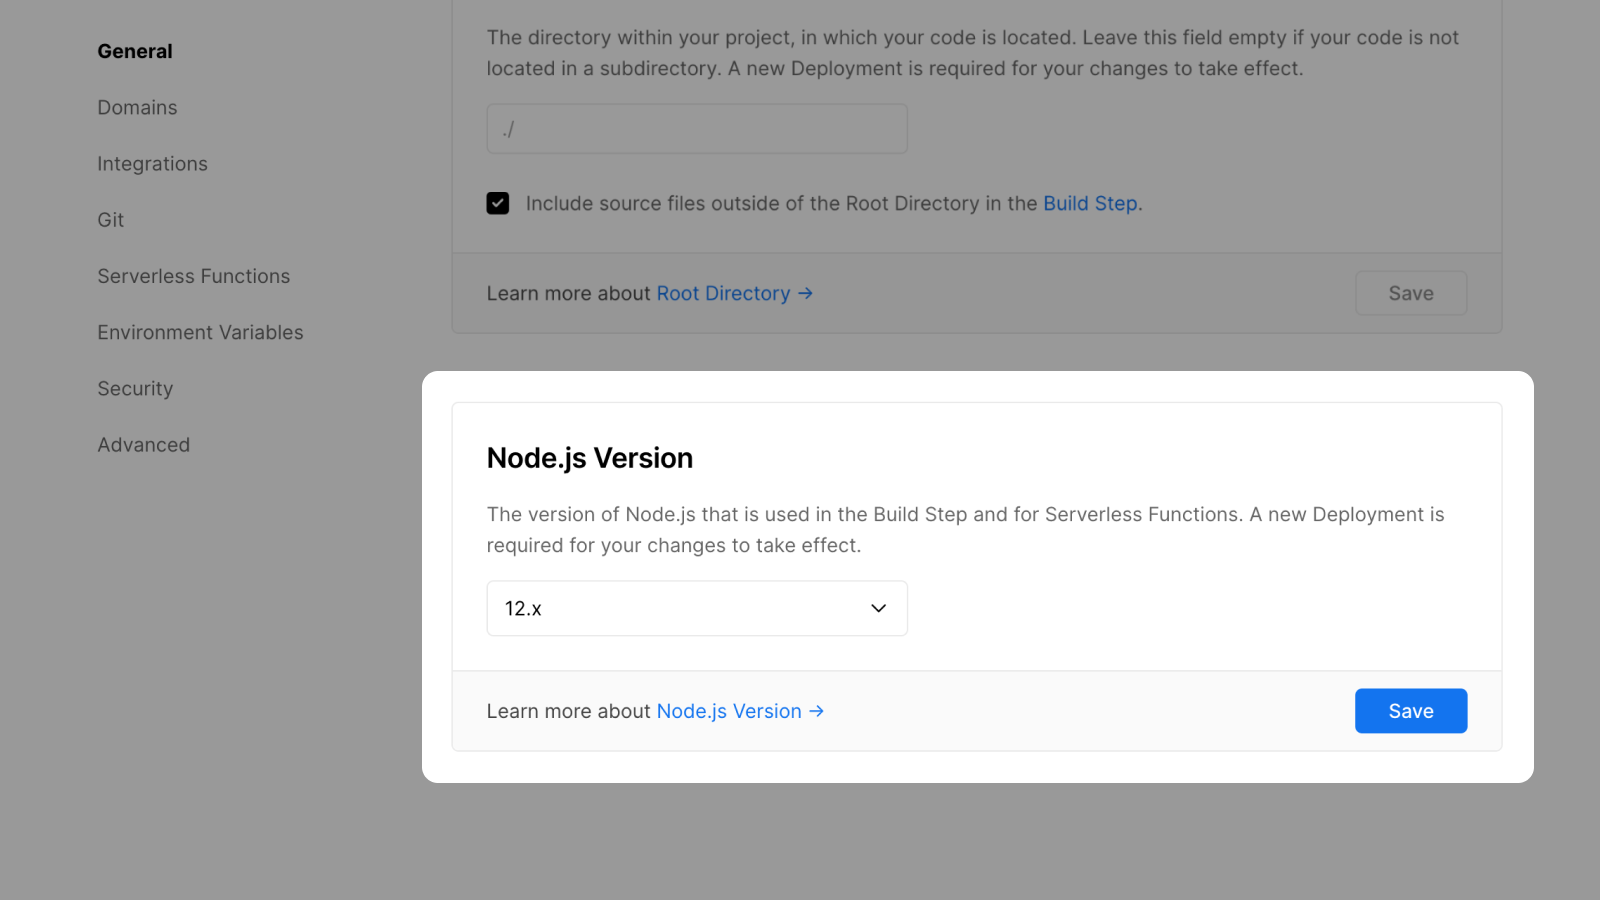 Cover for Node.js Version now customizable in the Project Settings